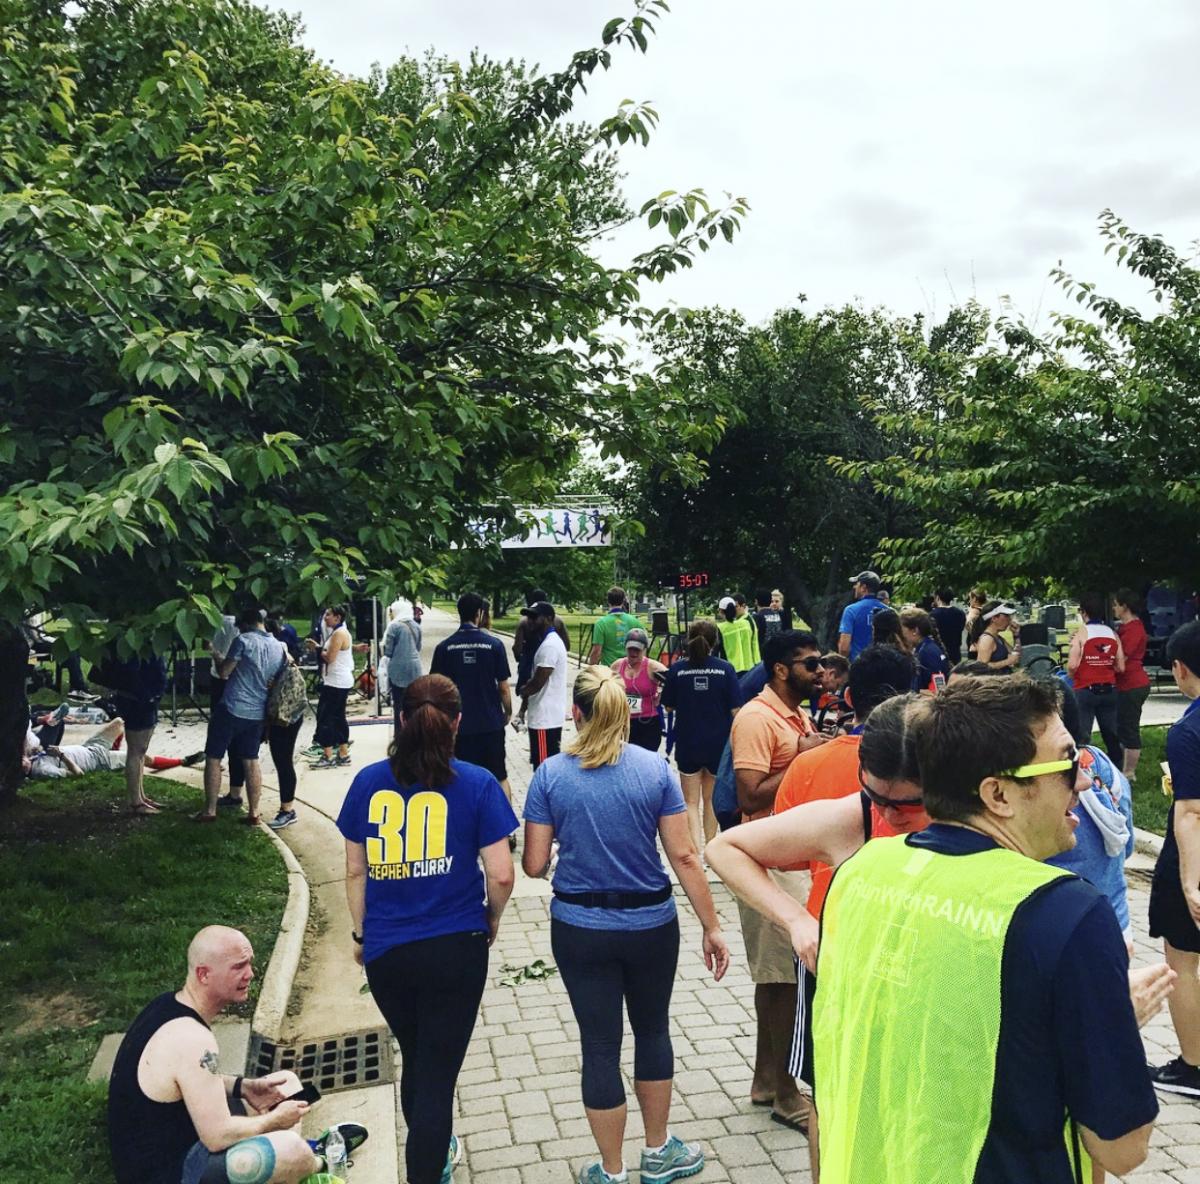 Several runners begin racing during 2017 Lace Up for RAINN 5K